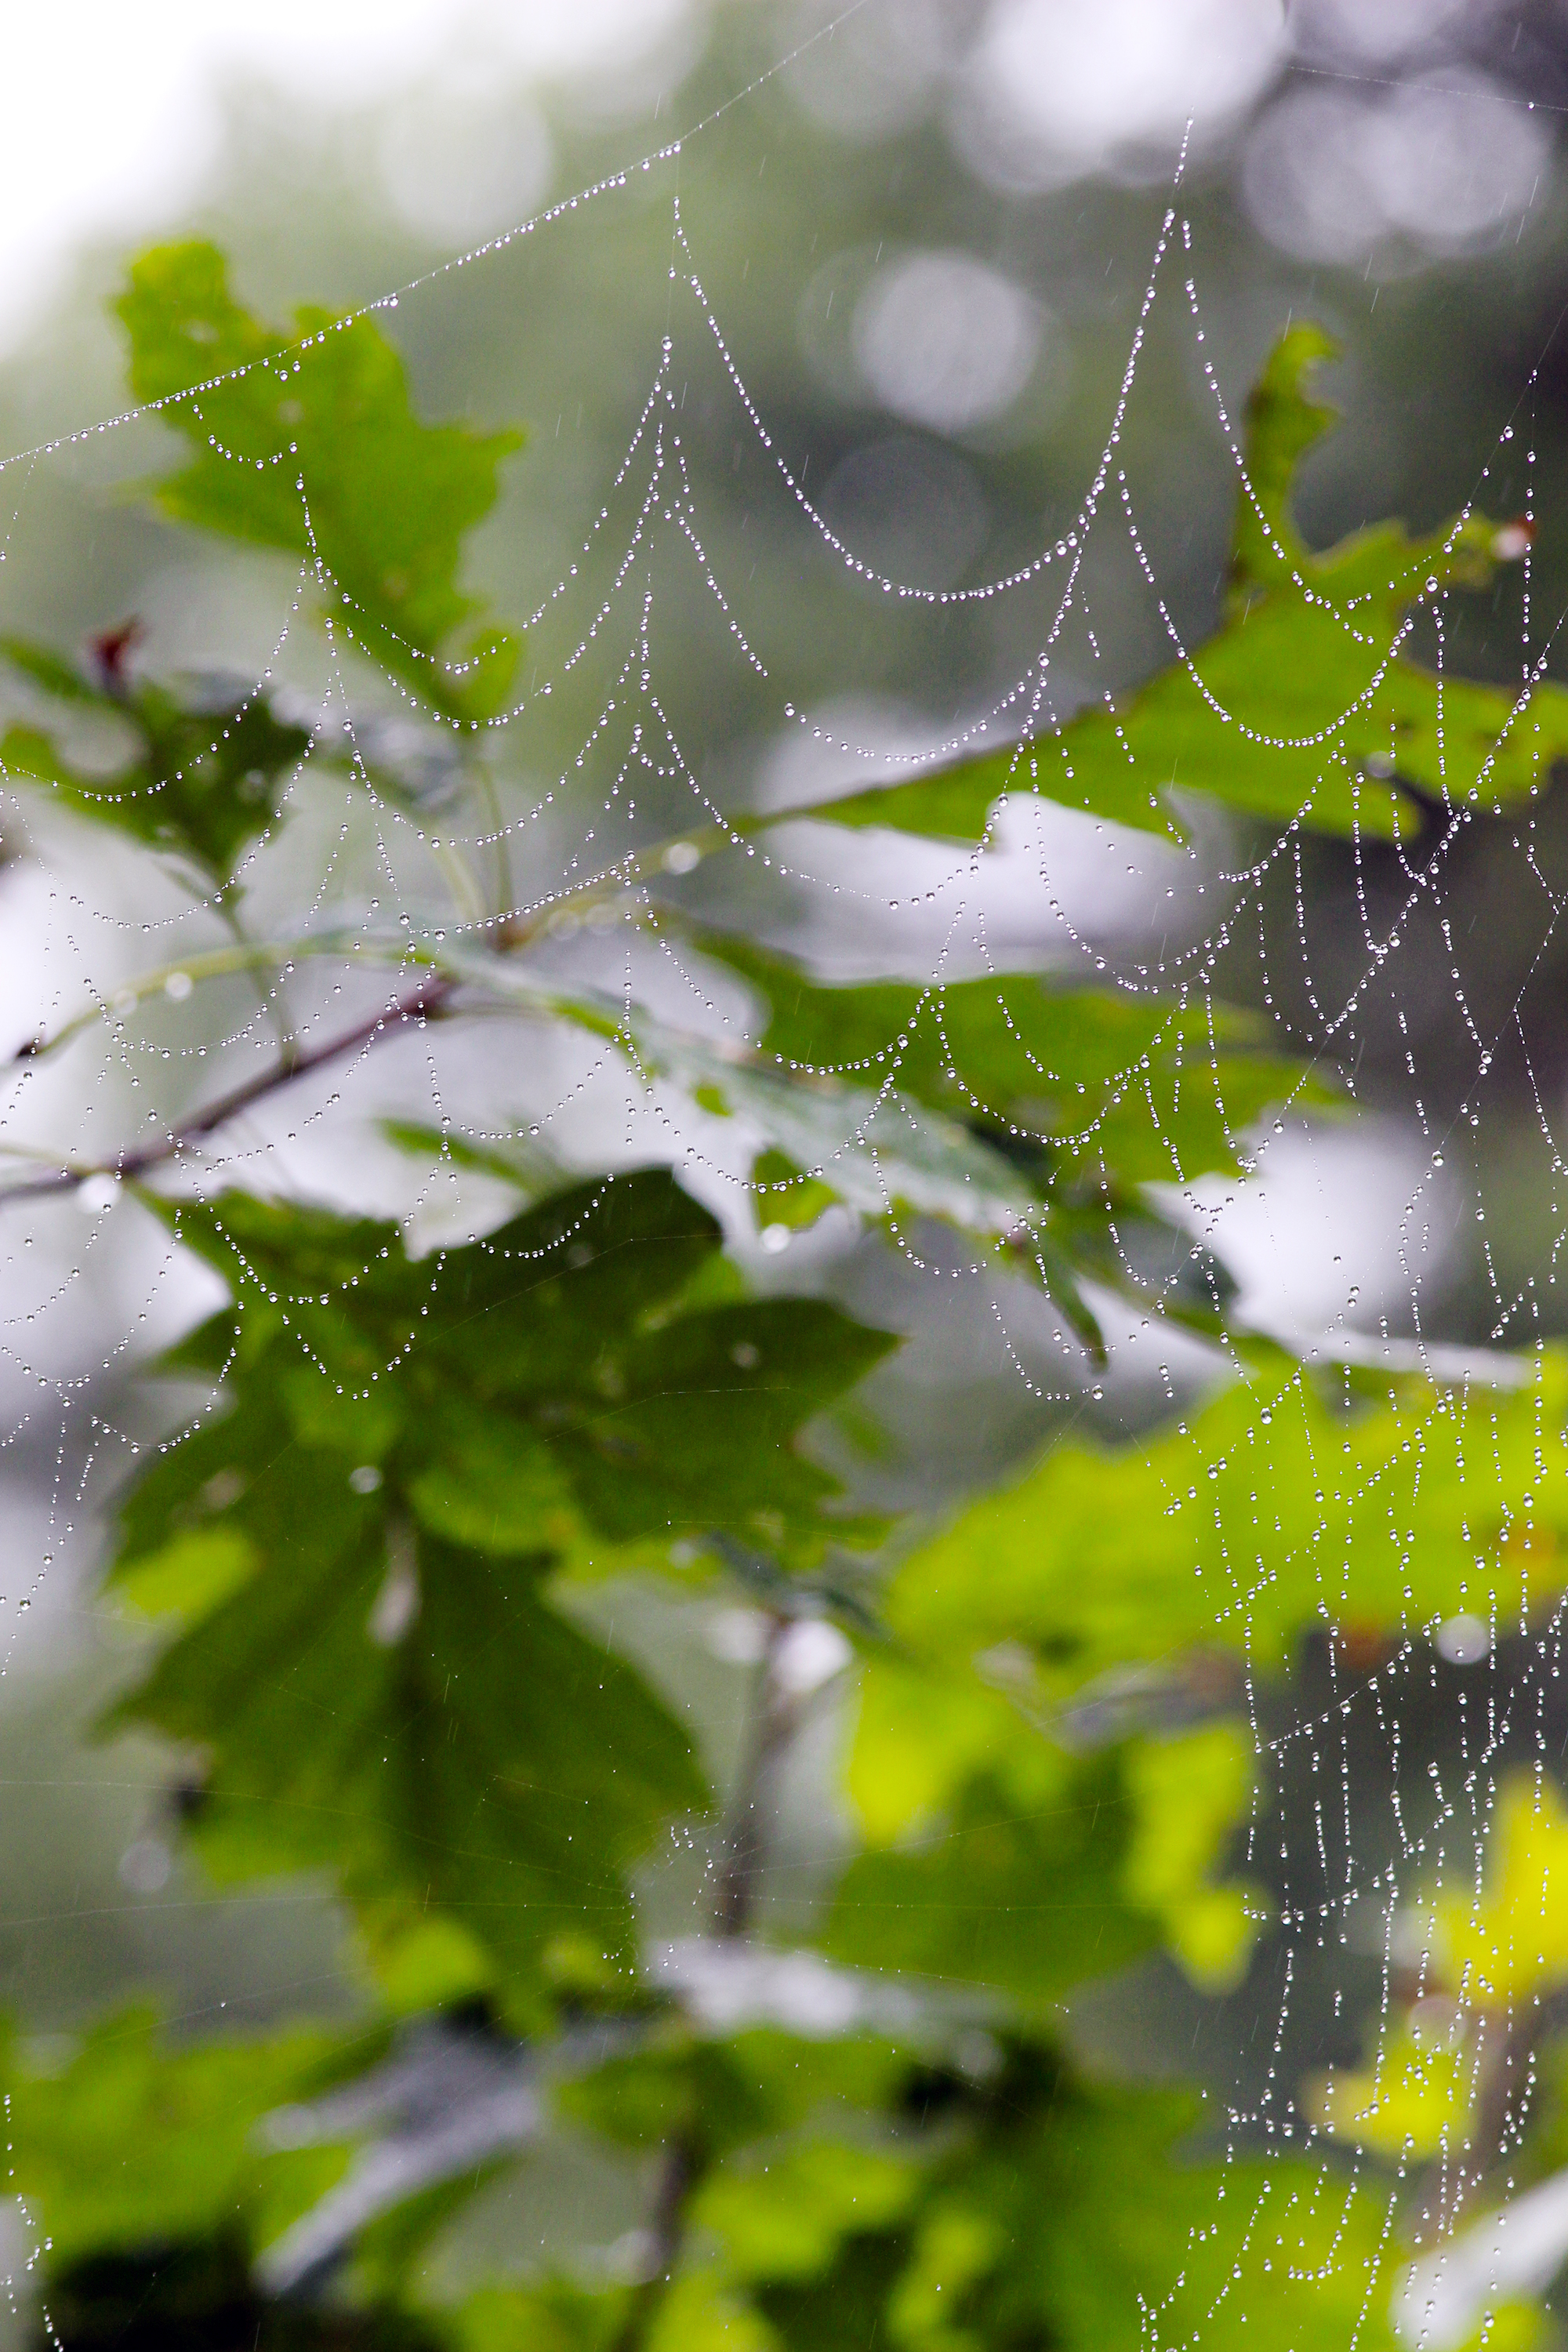 Tiny raindrops dot a large spider web spun between the branches of a leafed out oak tree.